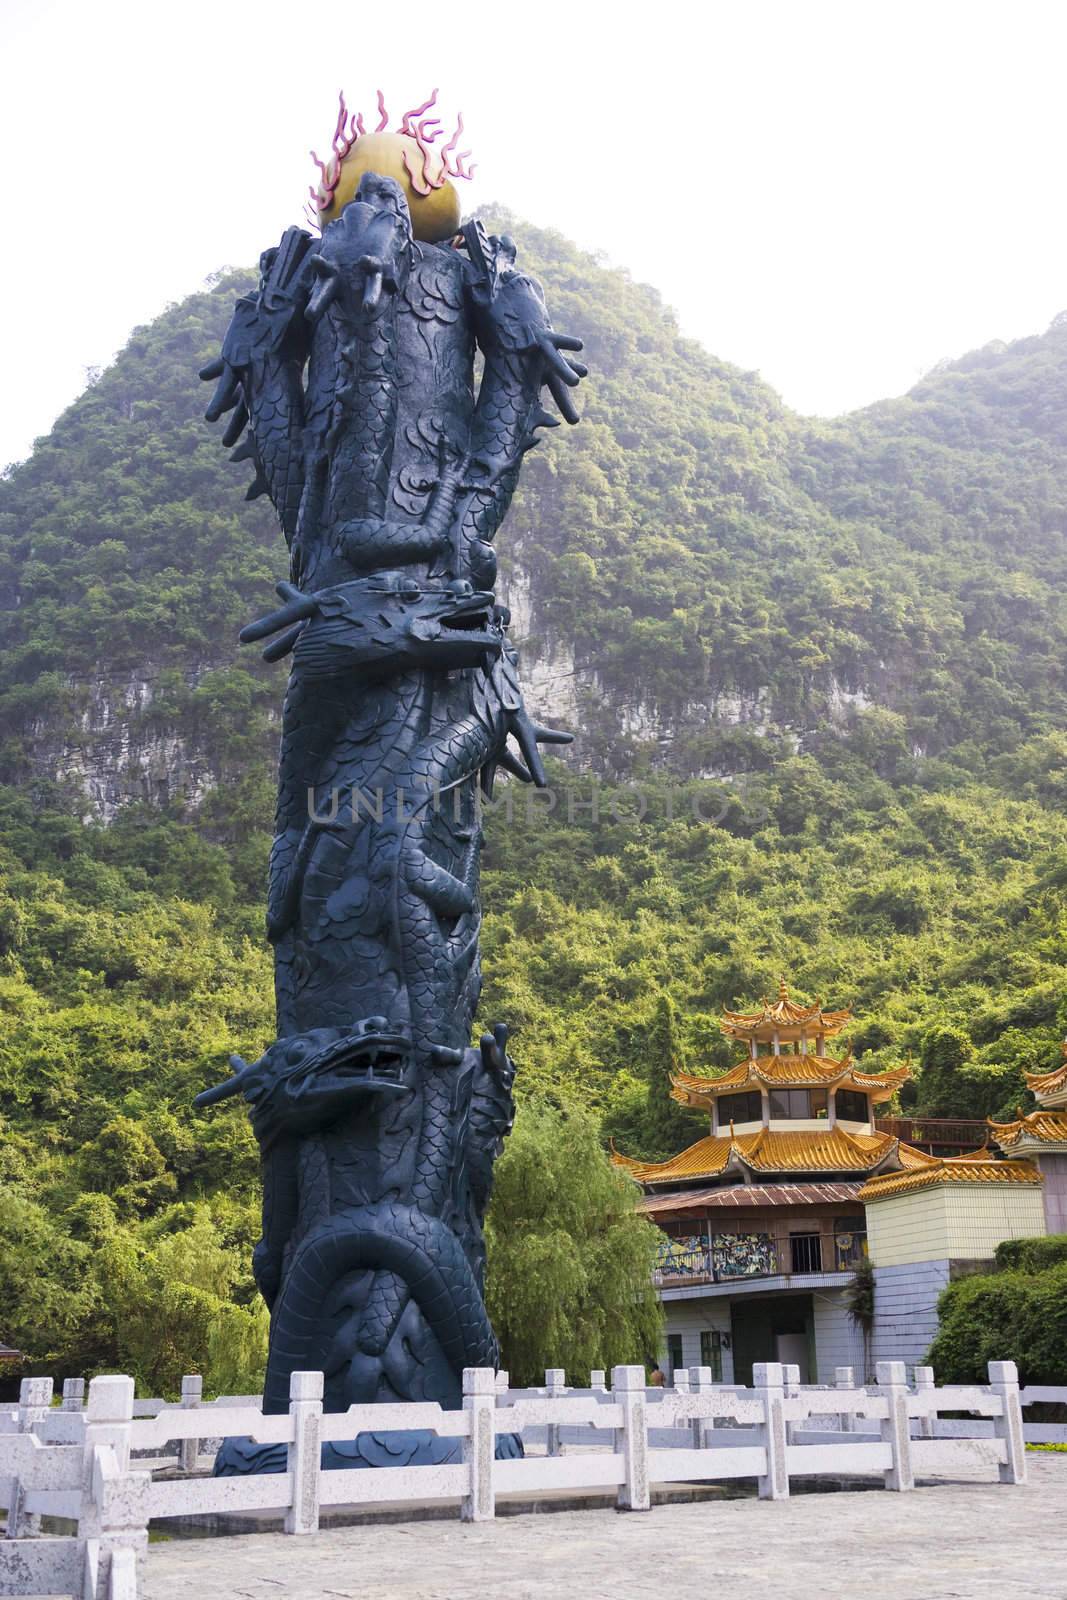 Image of a huge dragonball monument at the Assembly Dragon Cave entrance, Yangshuo, Guilin, China.